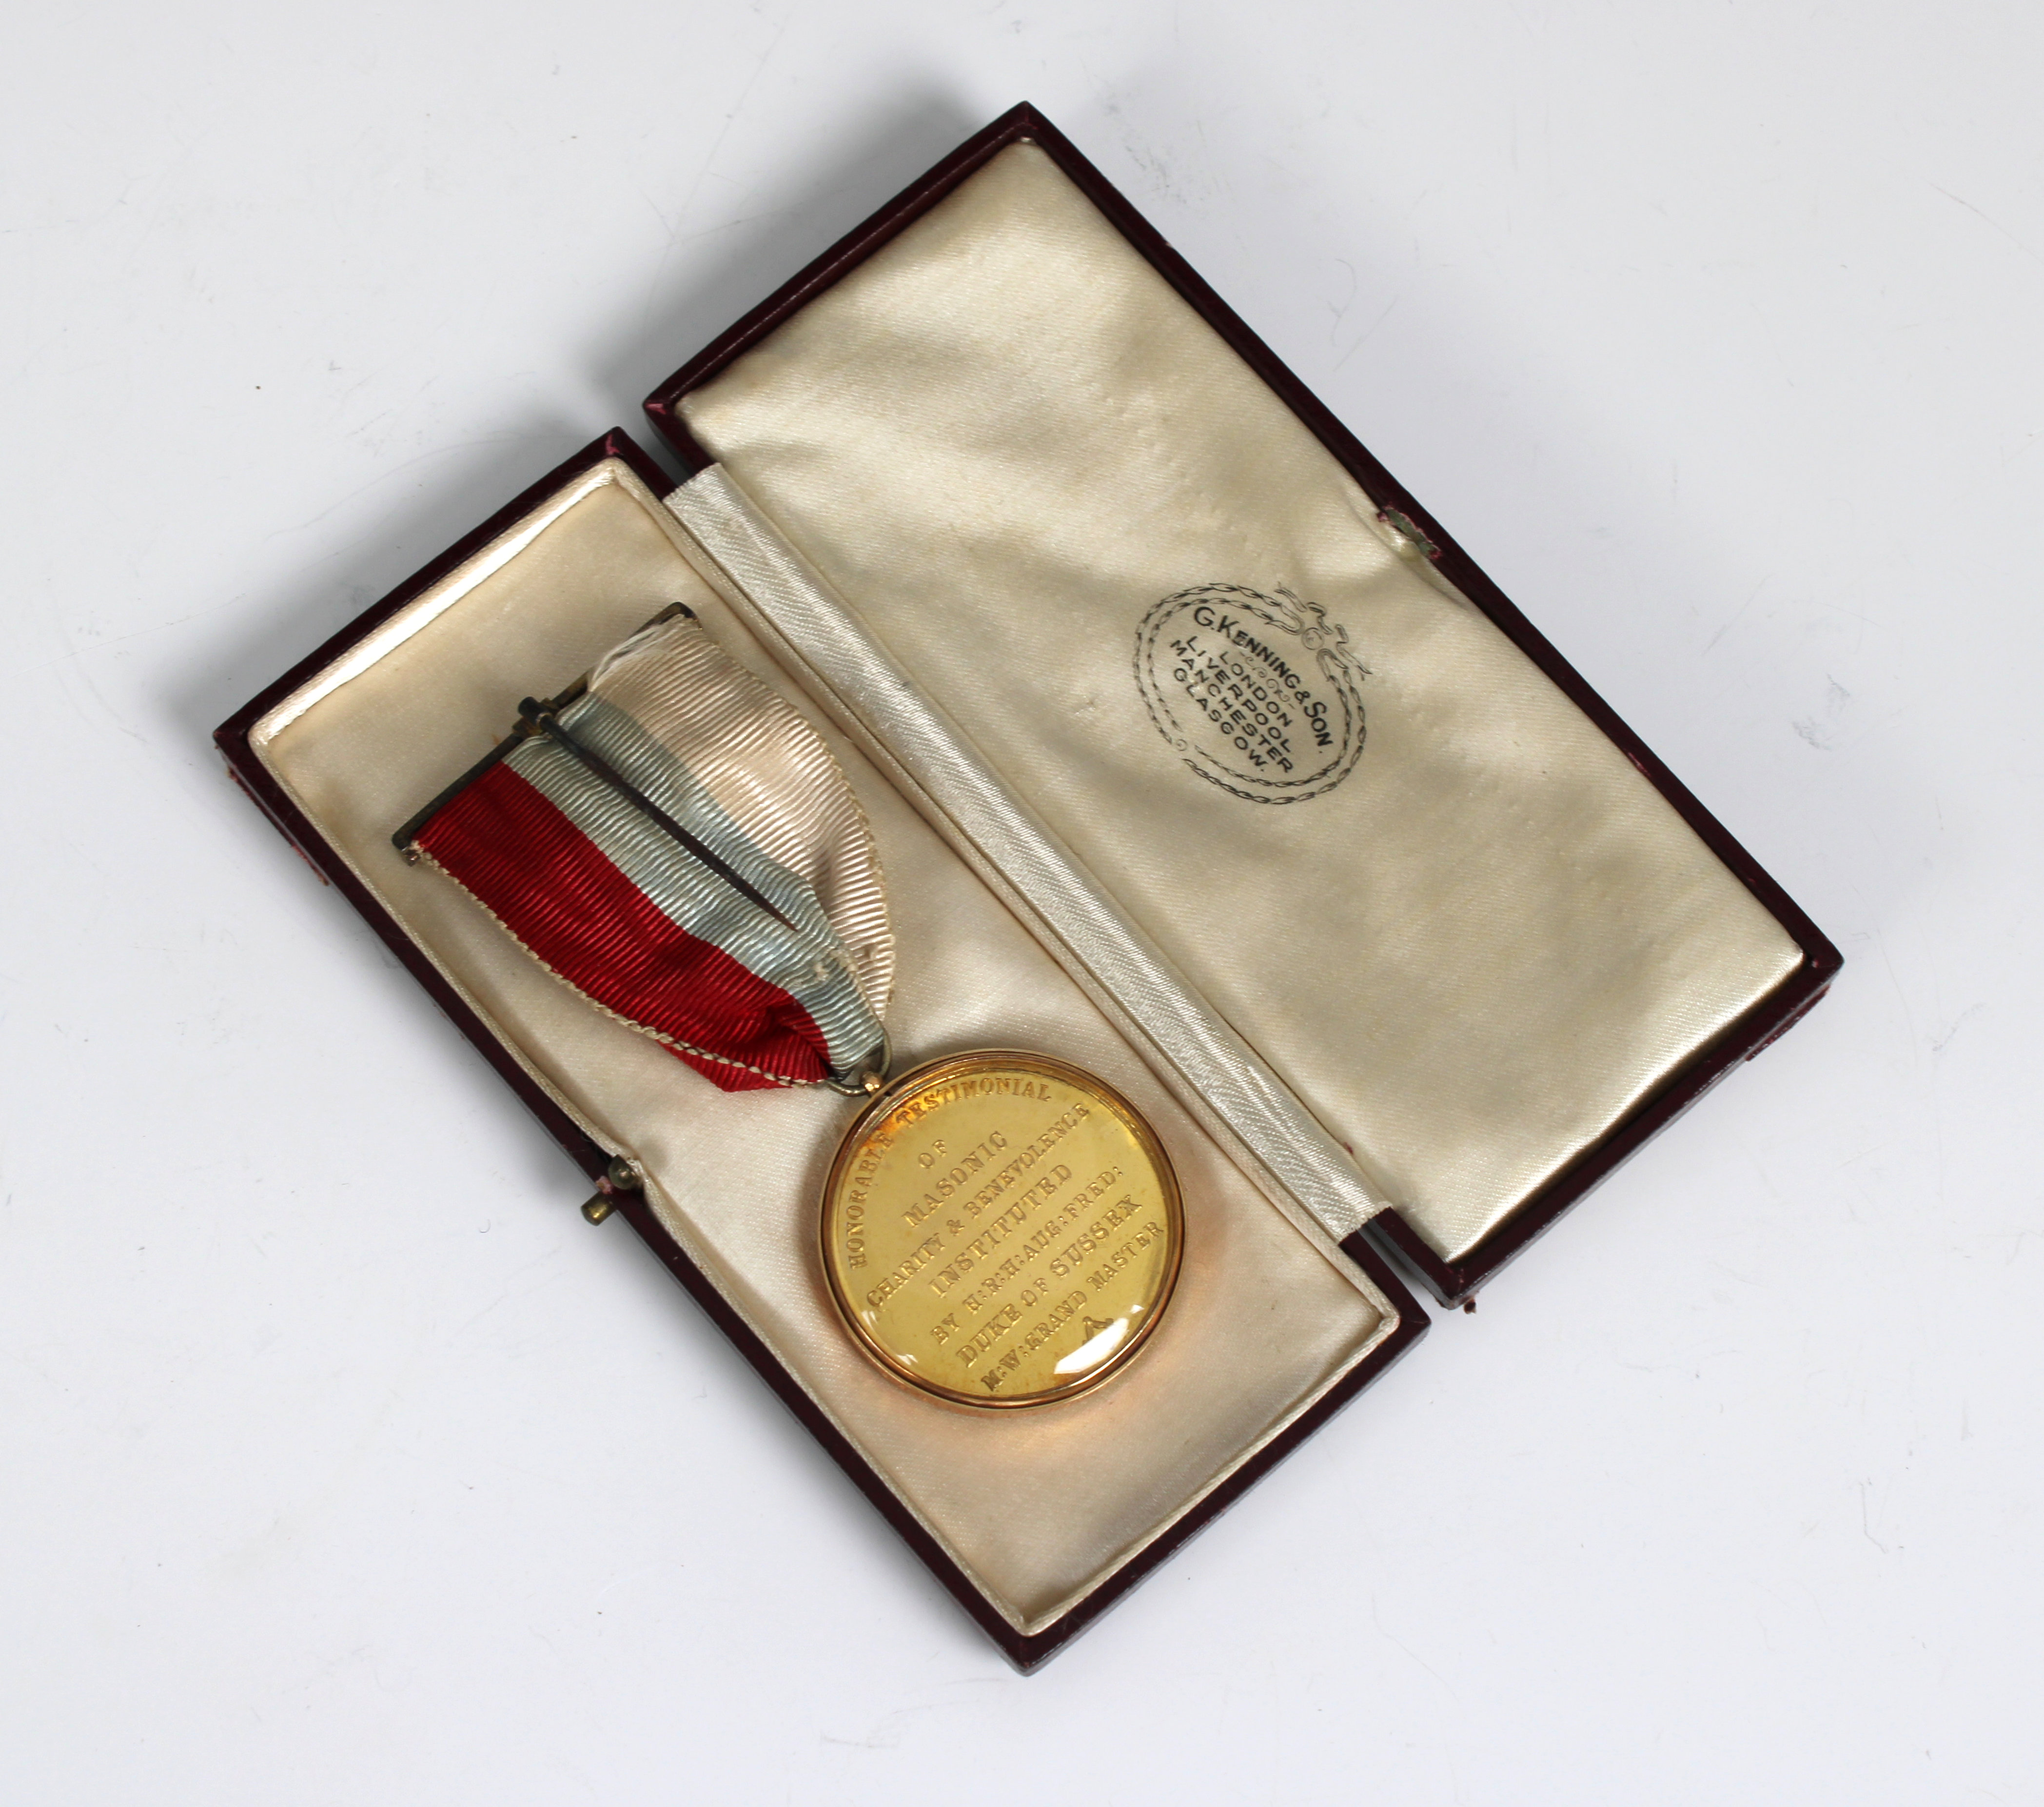 Gold mounted Charitable Masonic medal, dated 'MDCCCXXX', 1830 - Image 2 of 5